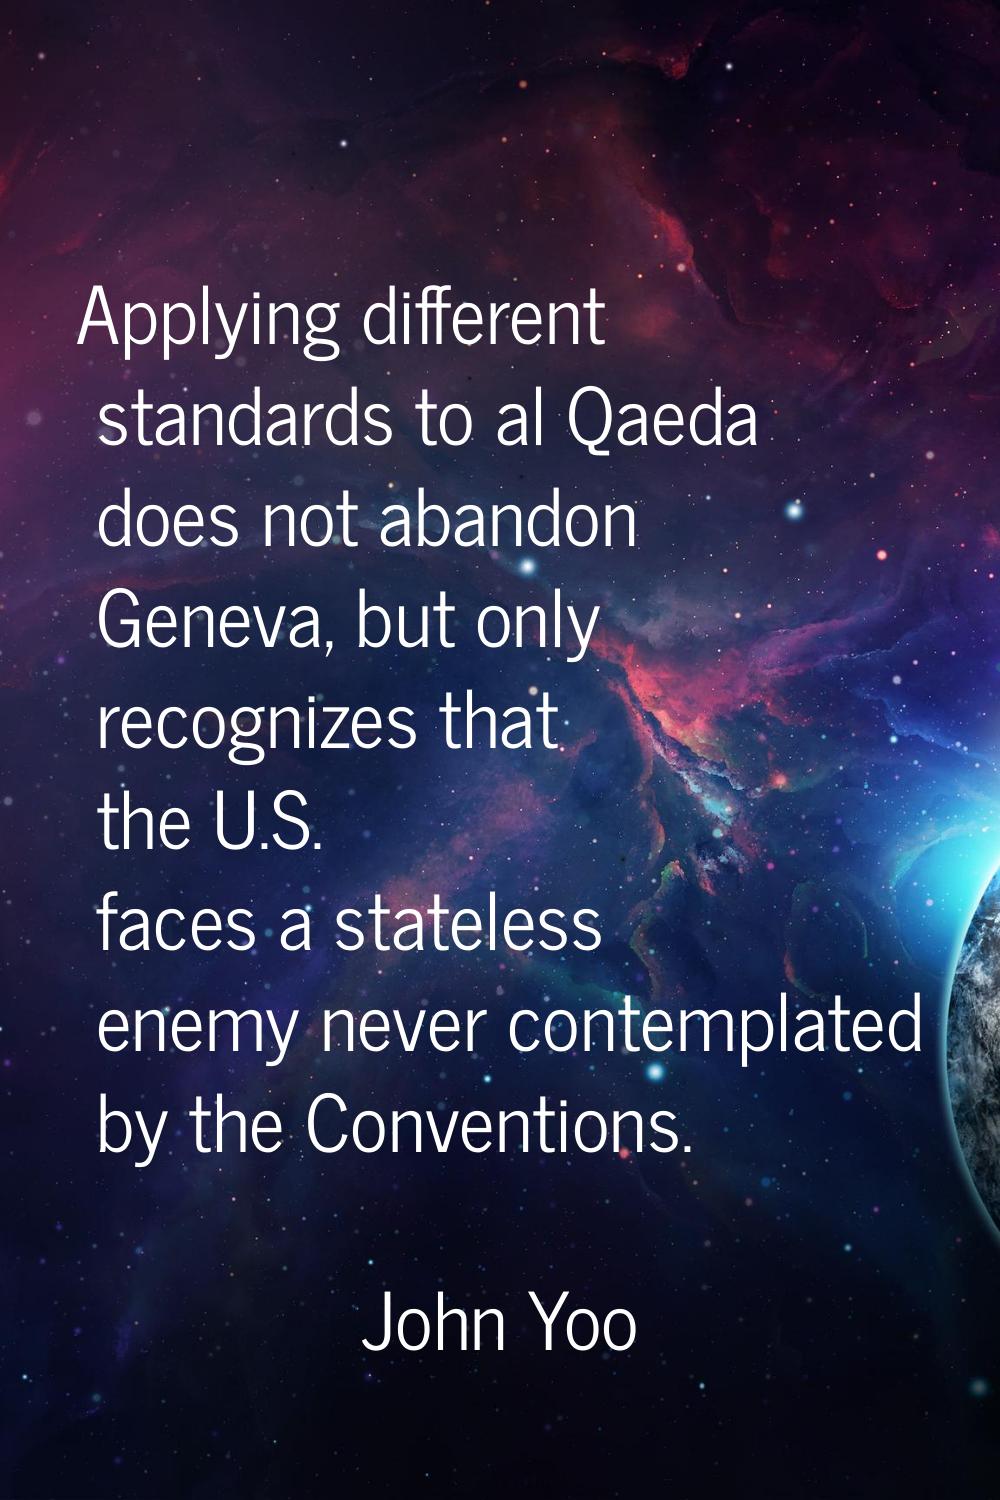 Applying different standards to al Qaeda does not abandon Geneva, but only recognizes that the U.S.